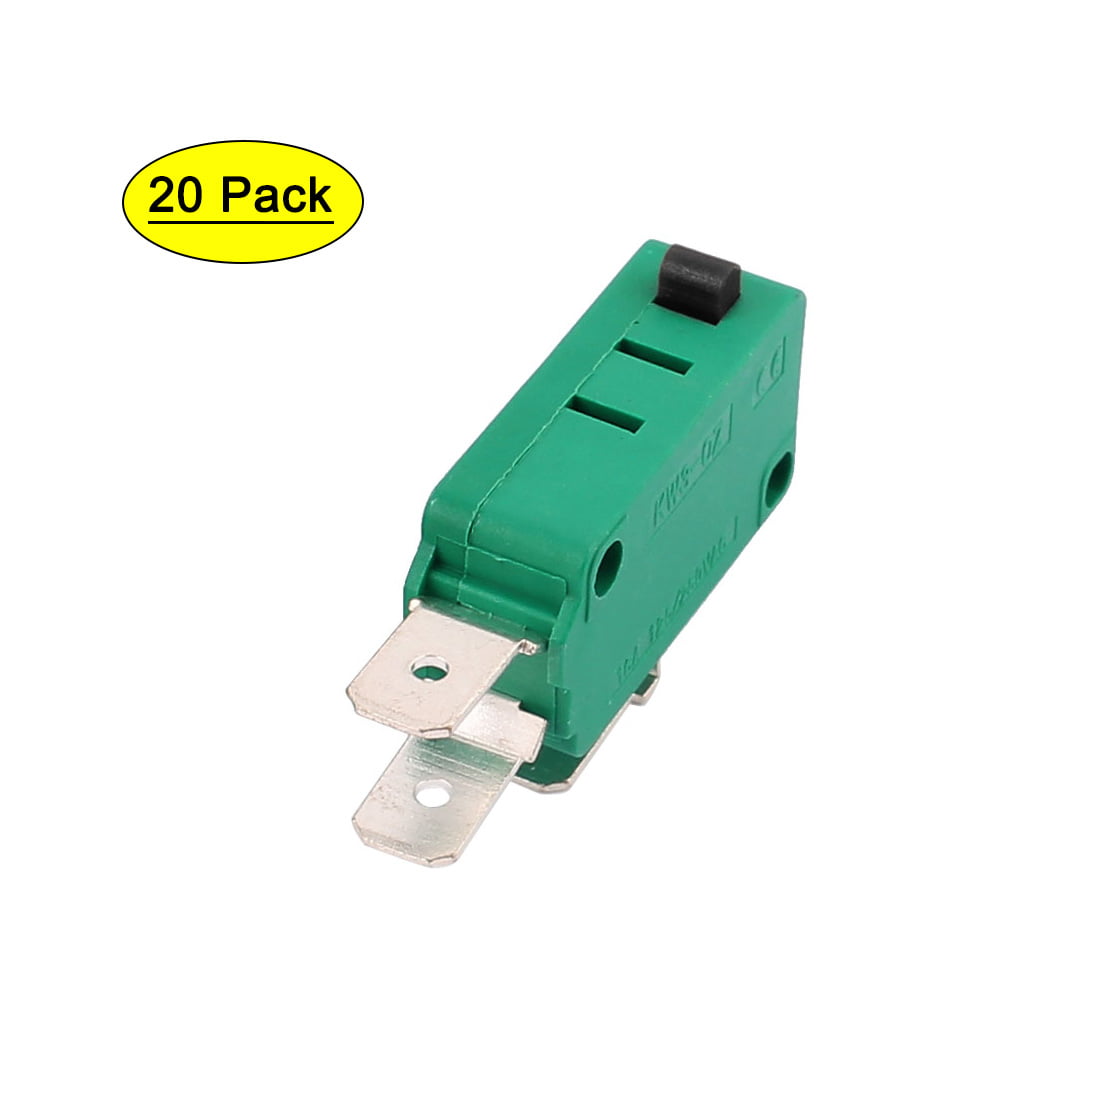 20 Pcs Momentary Lever Actuator Miniature Micro Switch 